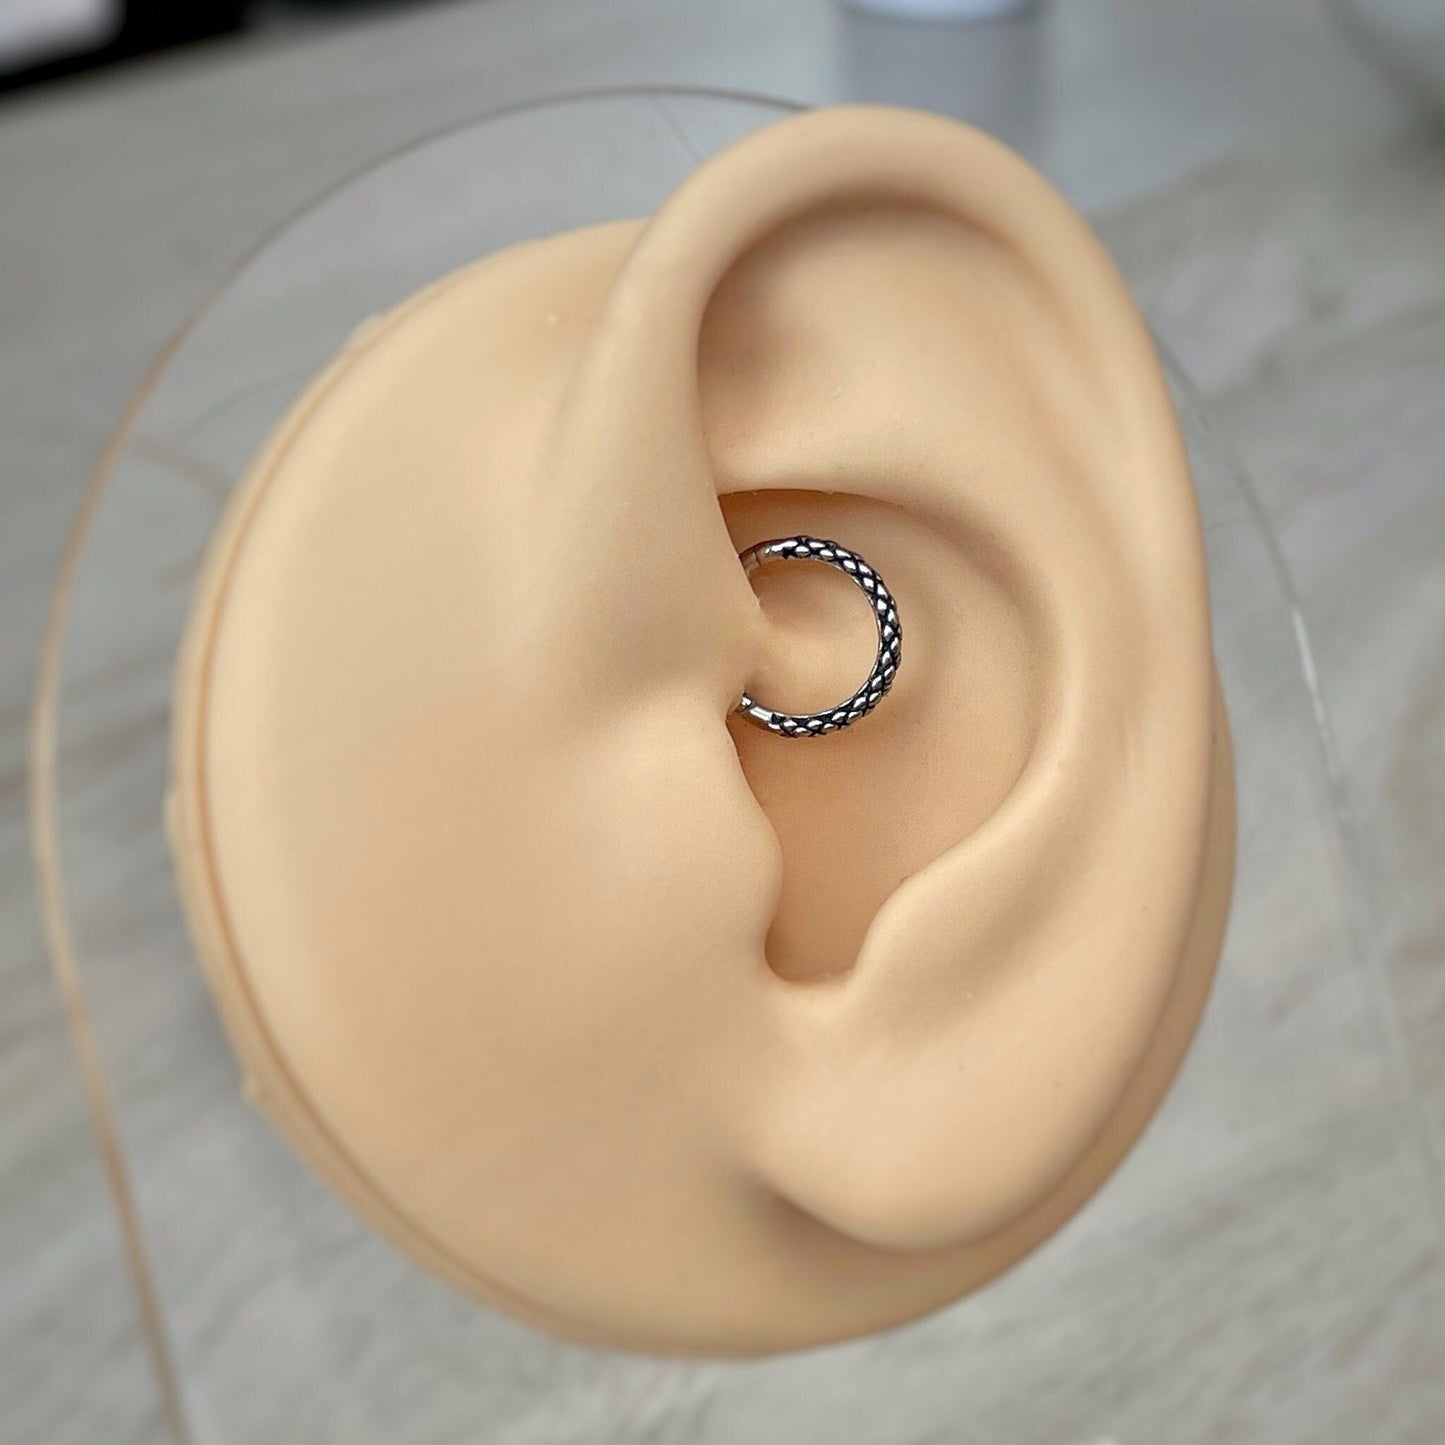 Silver Snake Daith Earring (16G or 18G | 8mm, 10mm or 12mm | Surgical Steel | Silver or Gold)